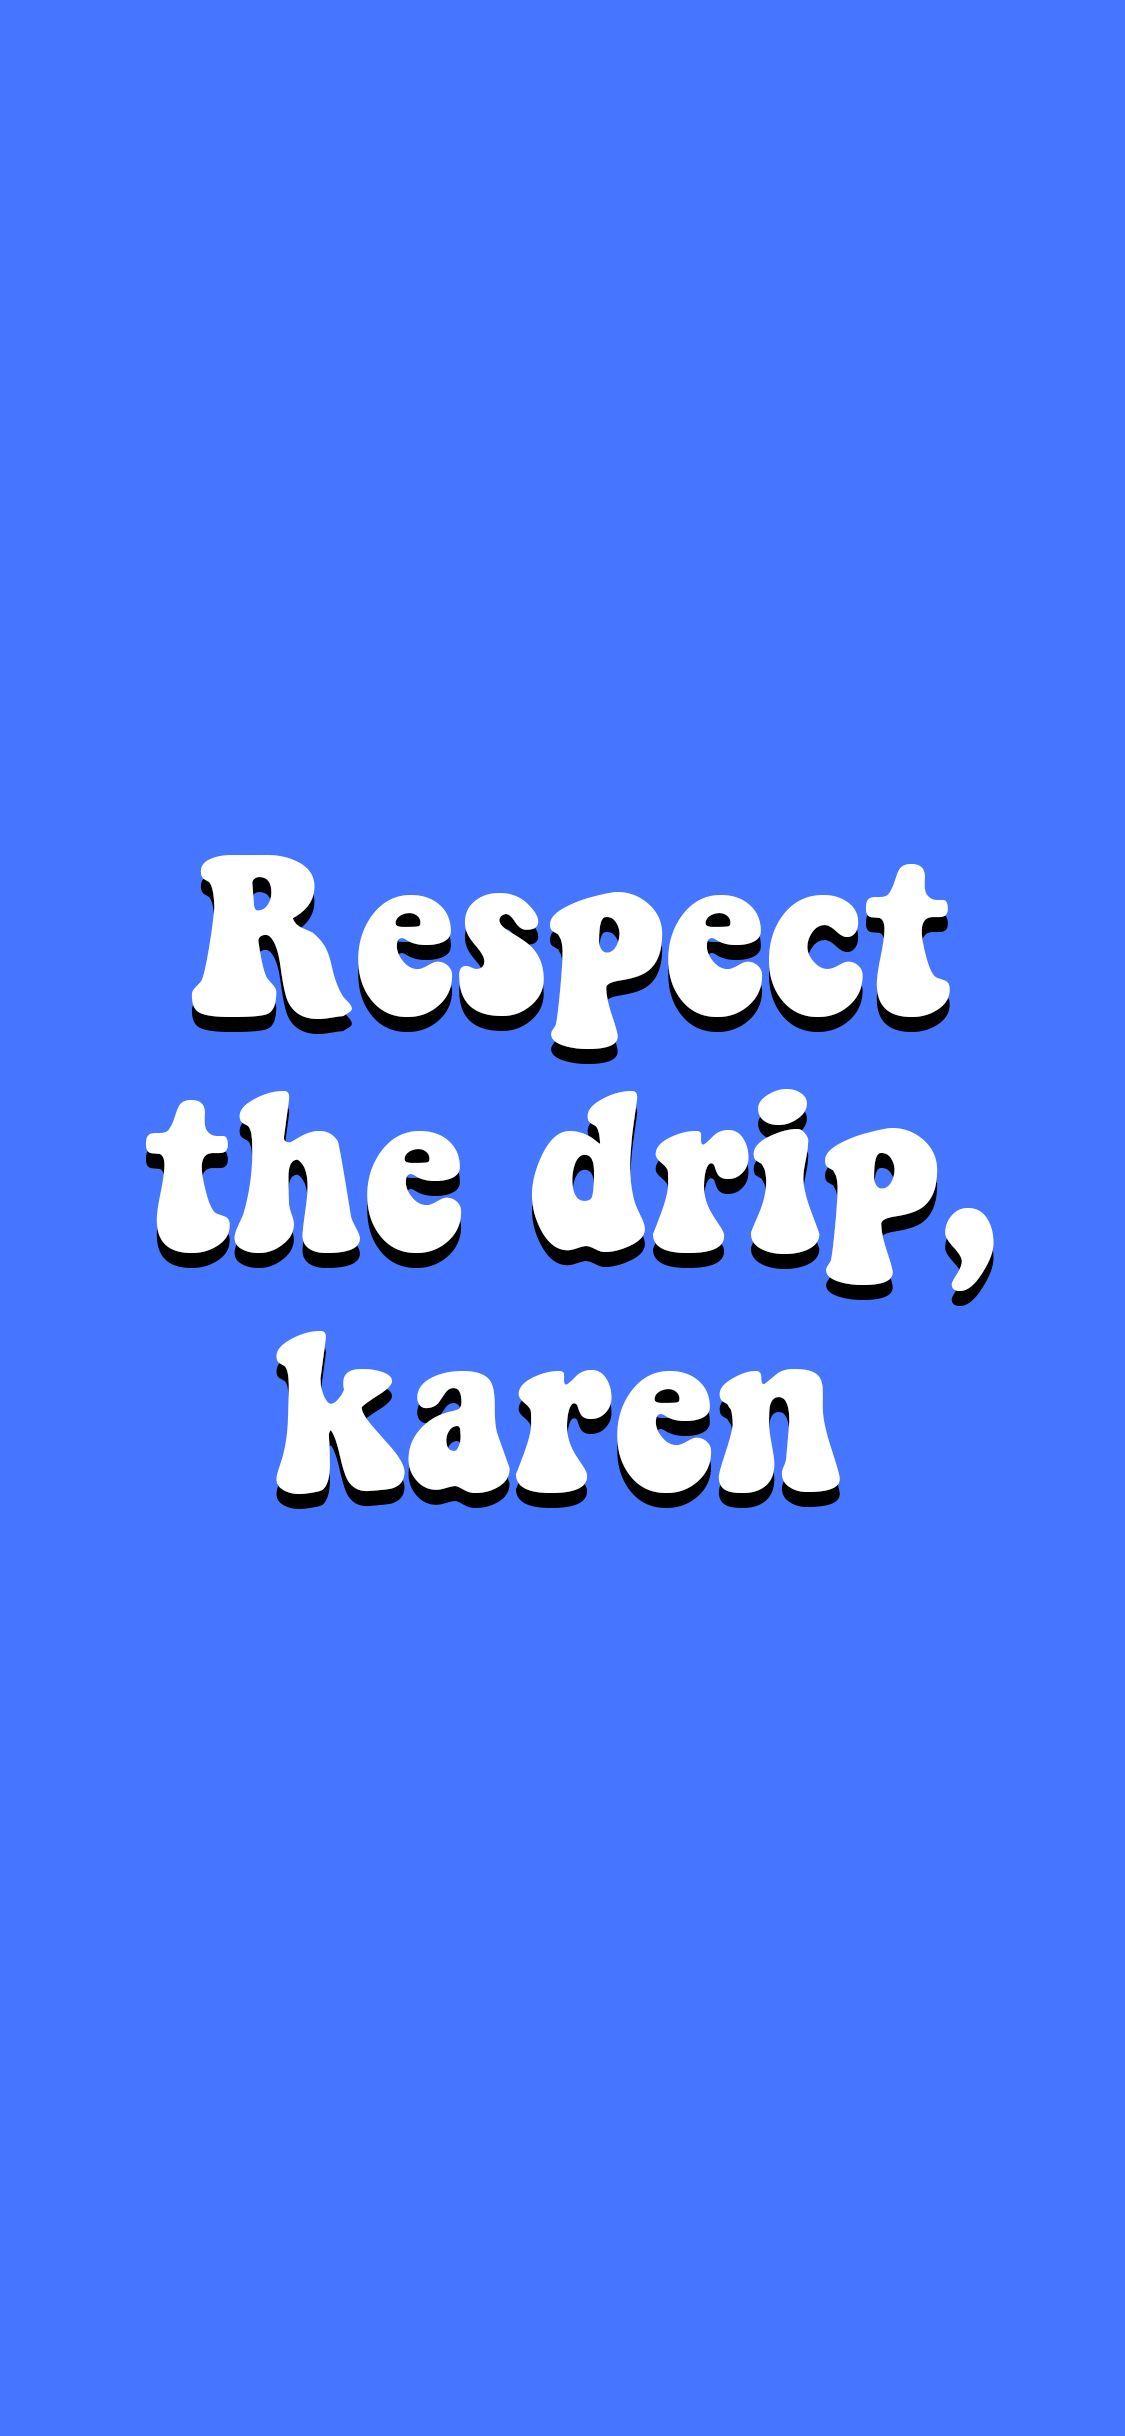 Wallpaper and Background Respect the drip, Karen for phone #wallpaper #background #cute. Cute tumblr wallpaper, Bad girl wallpaper, Badass wallpaper iphone